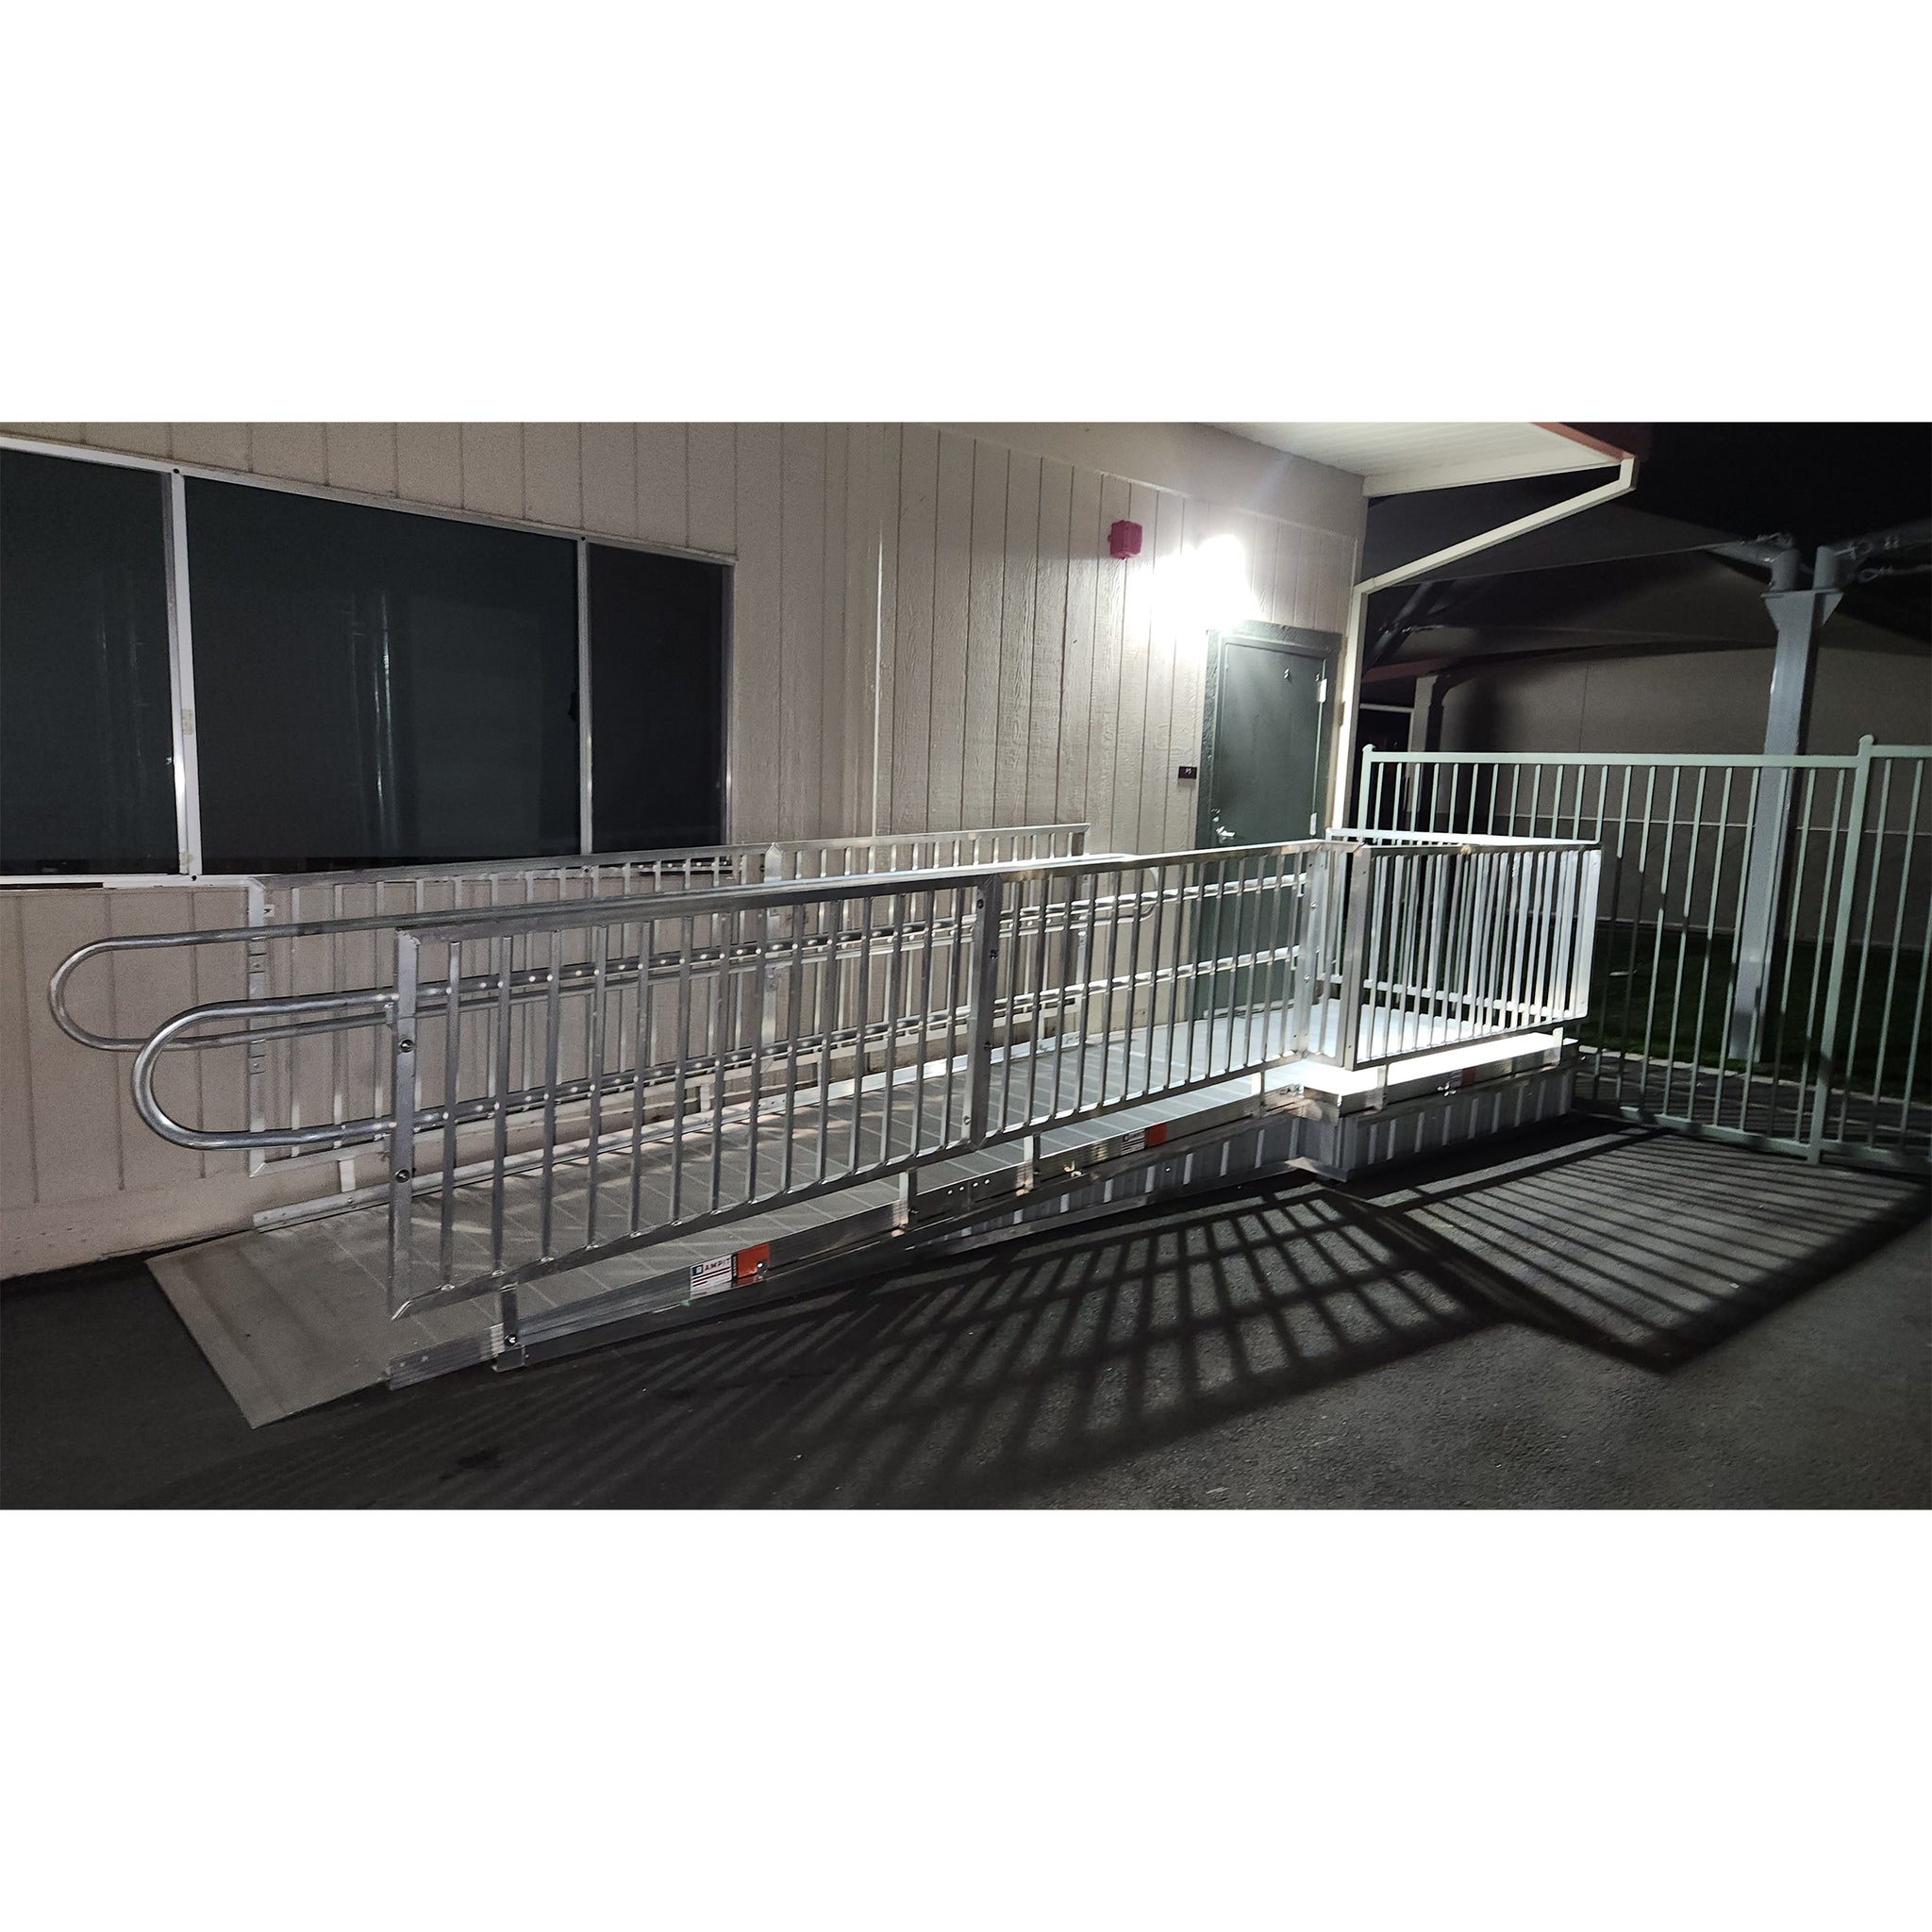 Rampit USA 54" Wide United Series Commercial Handicap Access Wheelchair Ramp